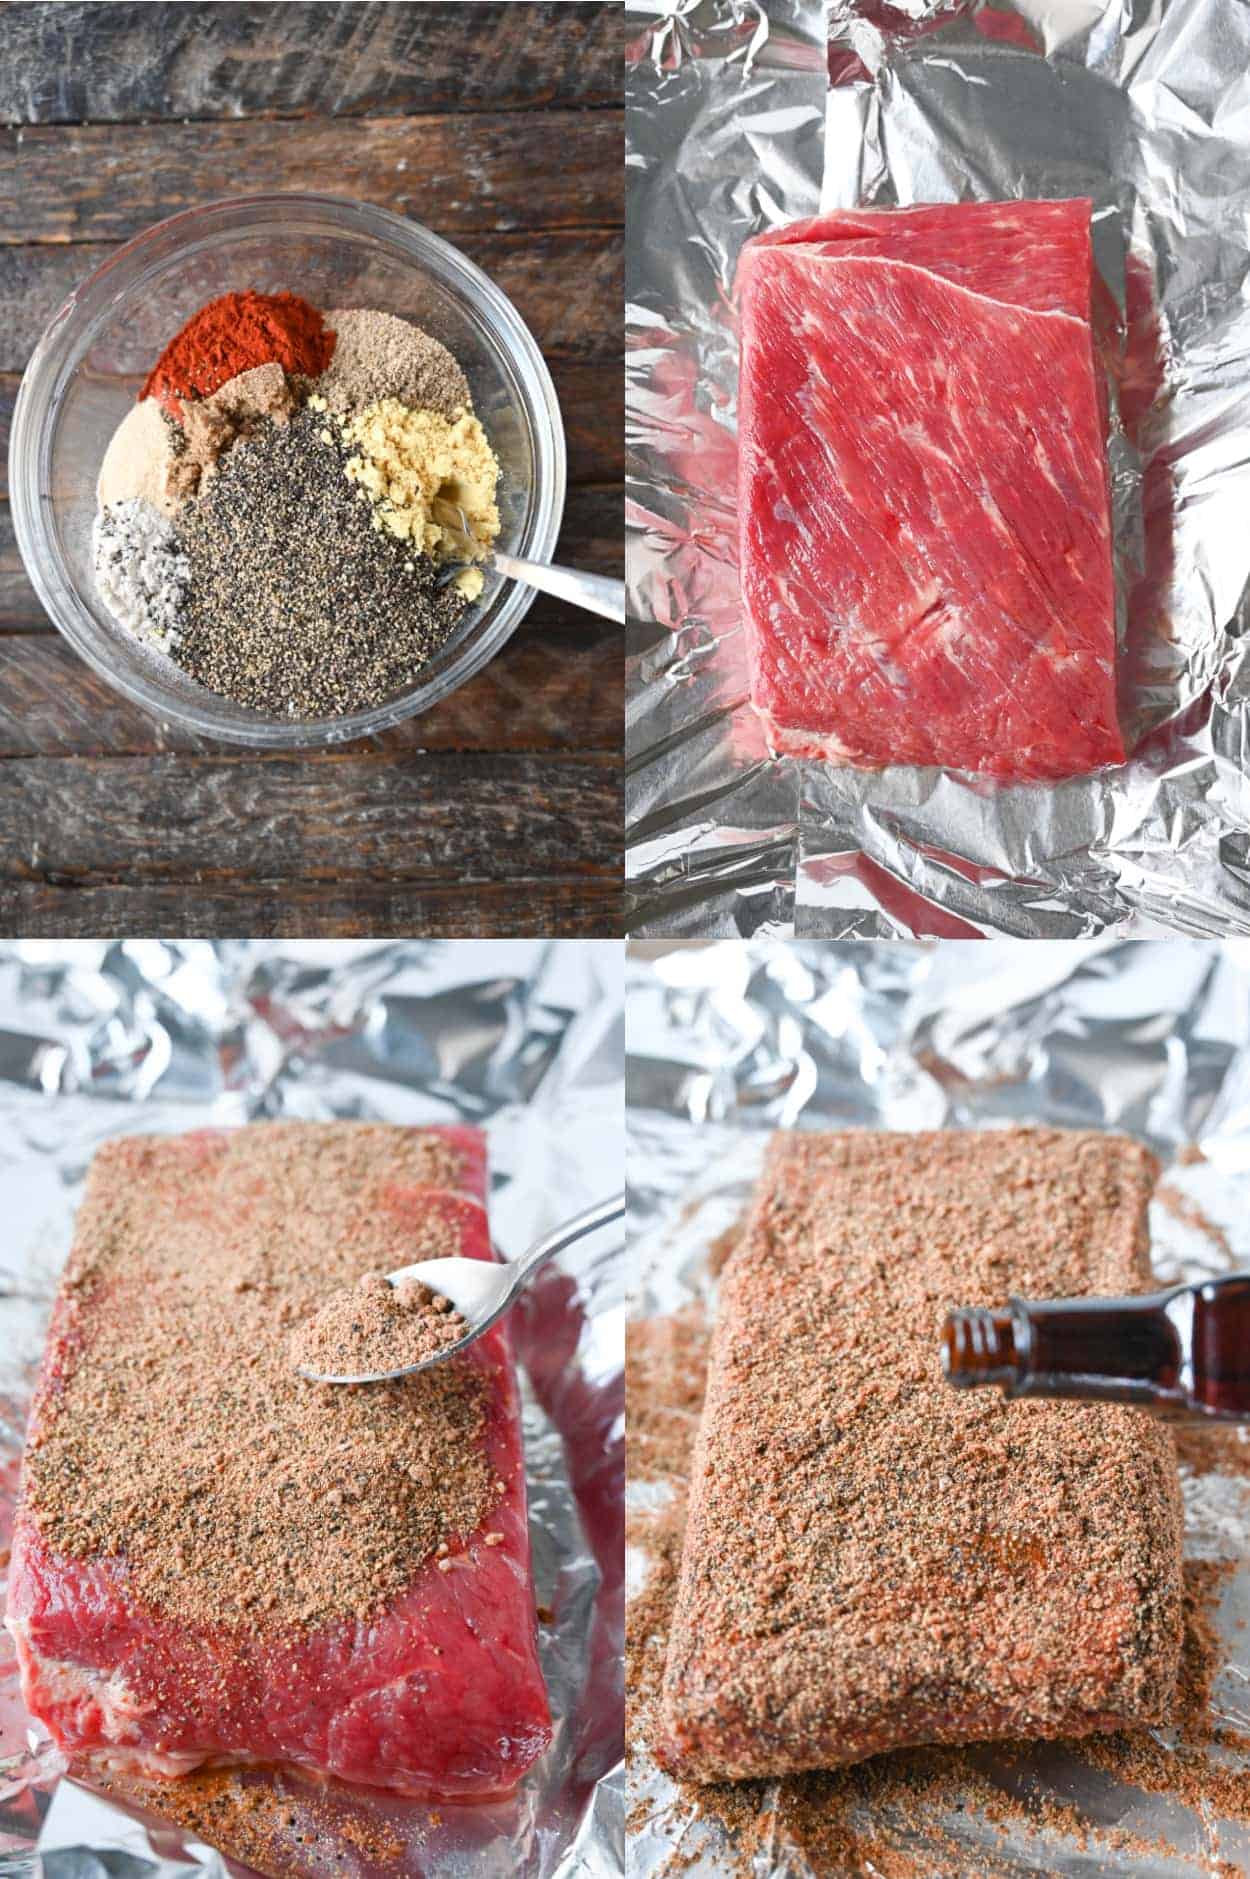 Four process photos. First one, all the spices mixed into a small bowl. Second one, raw corned beef placed on two overlapping sheets of aluminum foil. Third one spice mixture being sprinkled on the corned beef with a spoon. Fourth one, liquid smoke being drizzled on top of the corned beef.